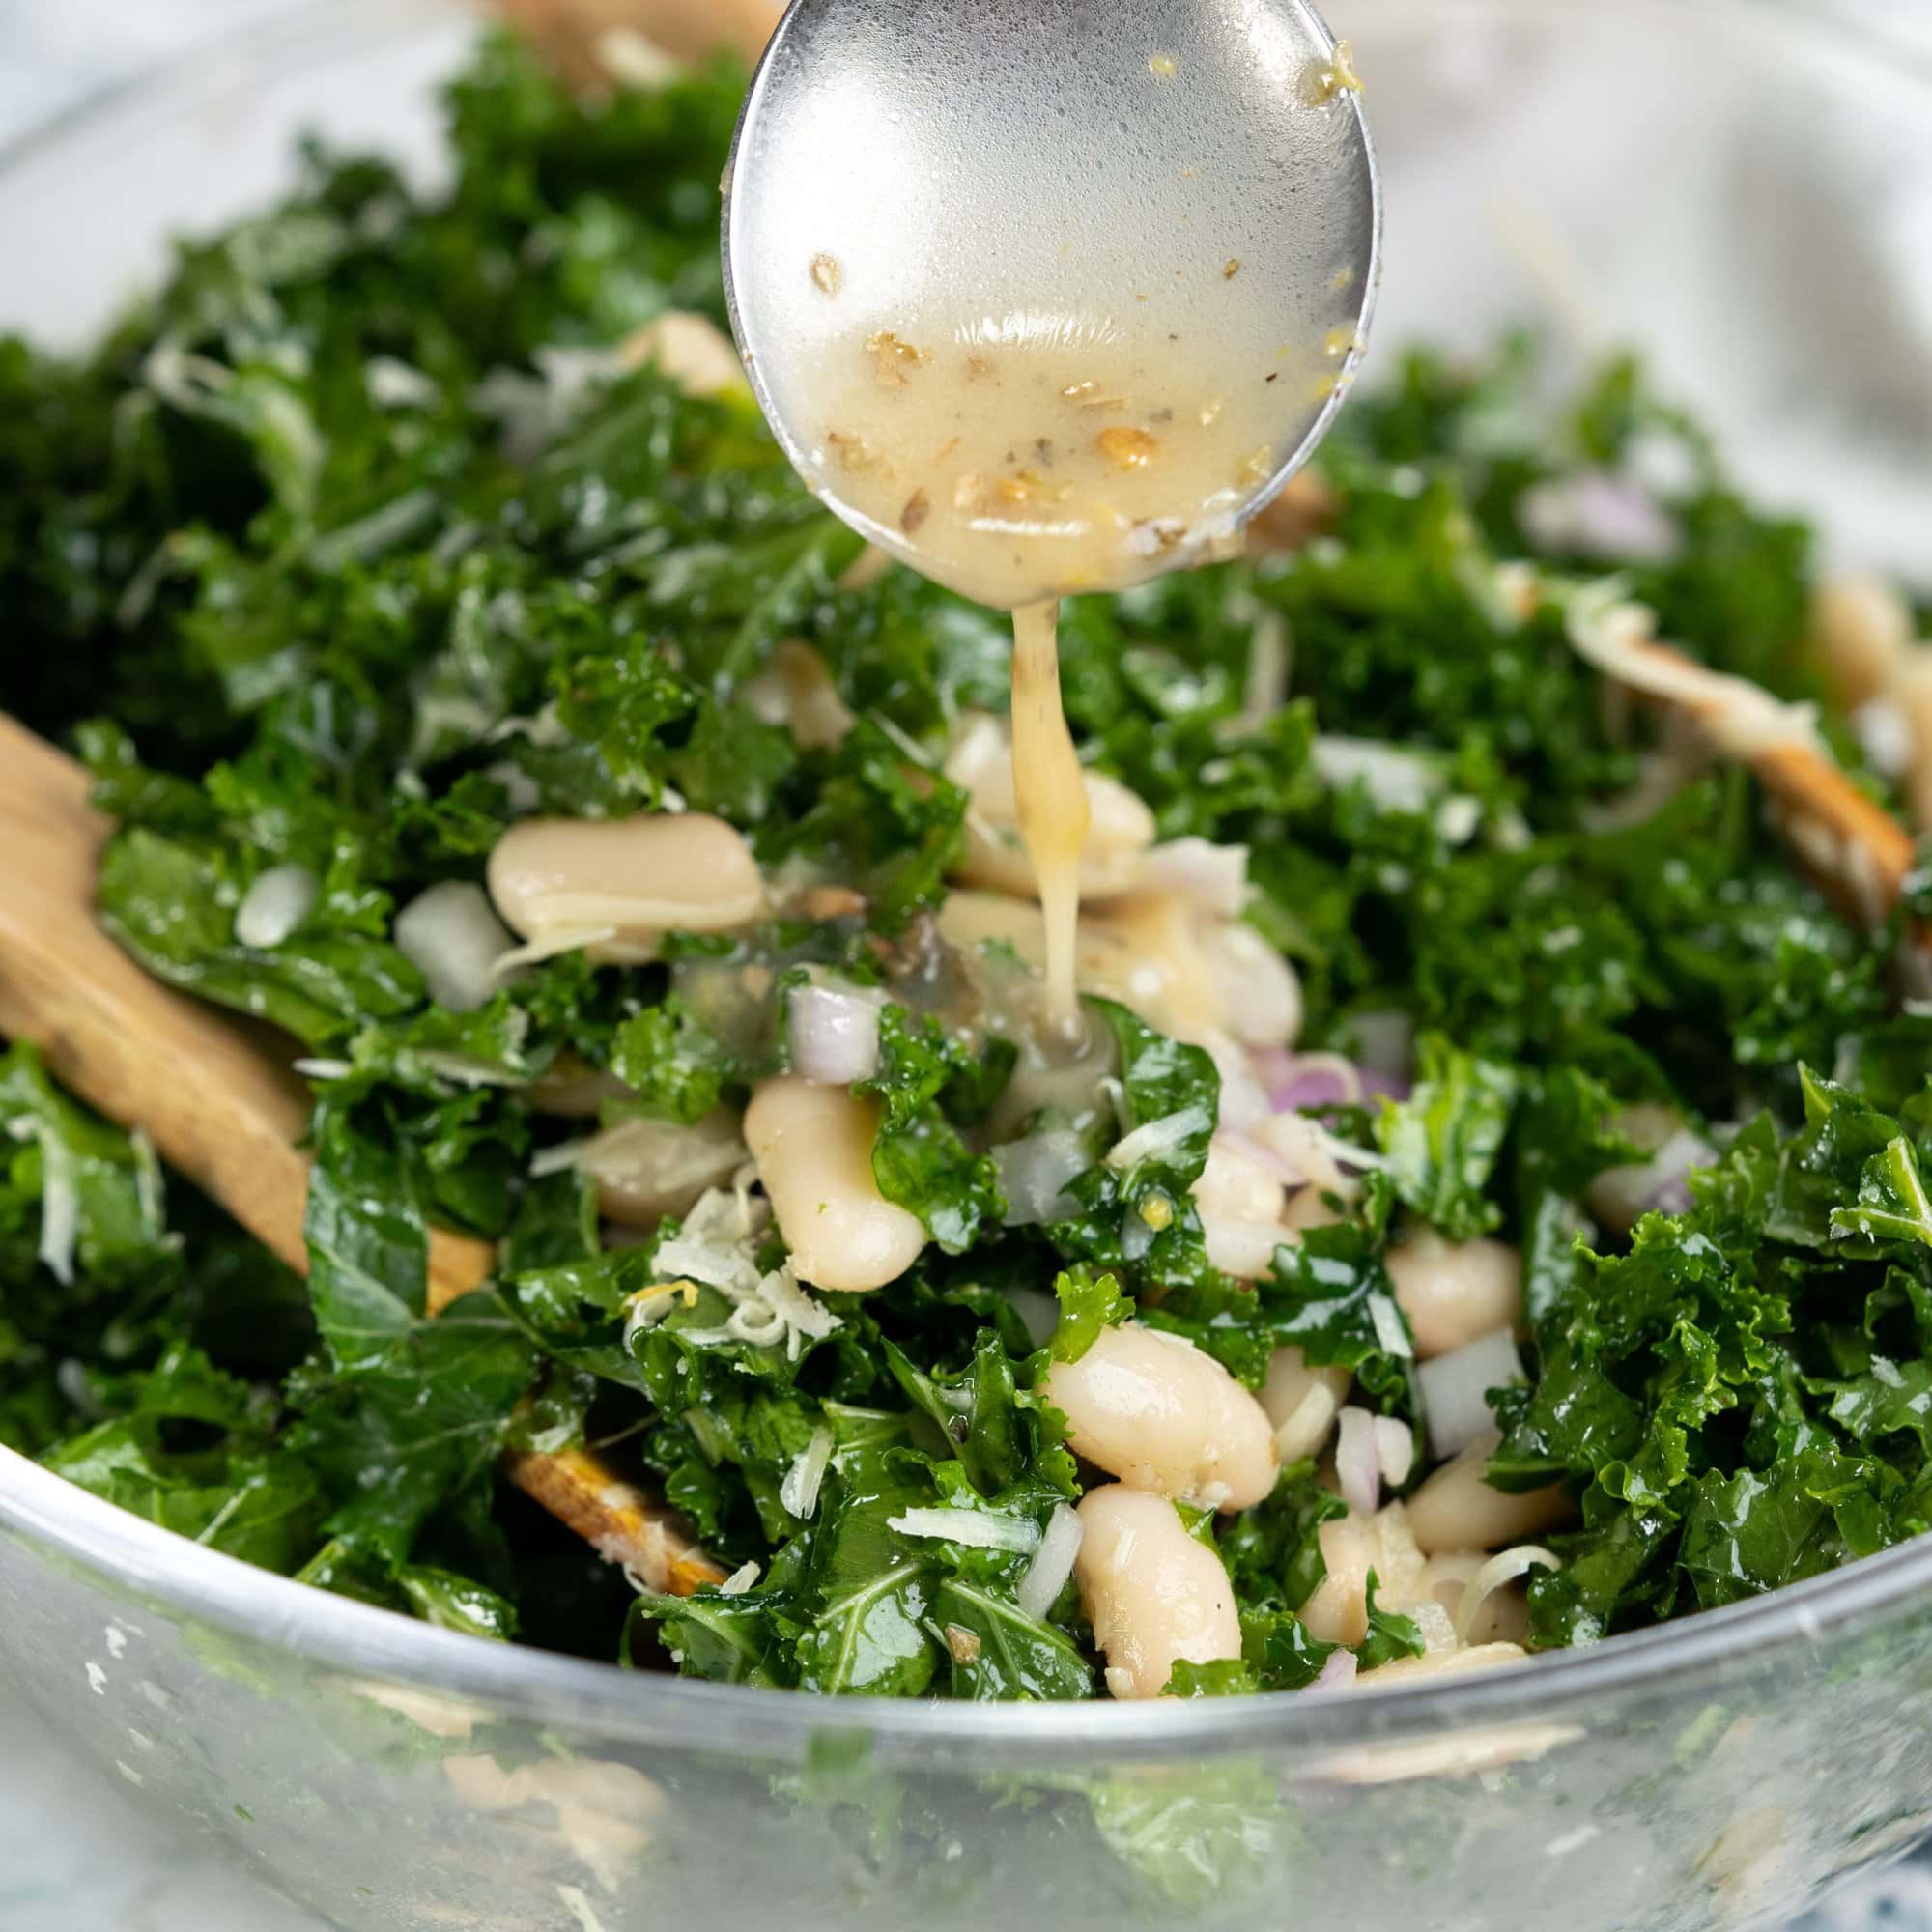 Lemon vinaigrette drizzled on top of white bean salad with kale and onions.